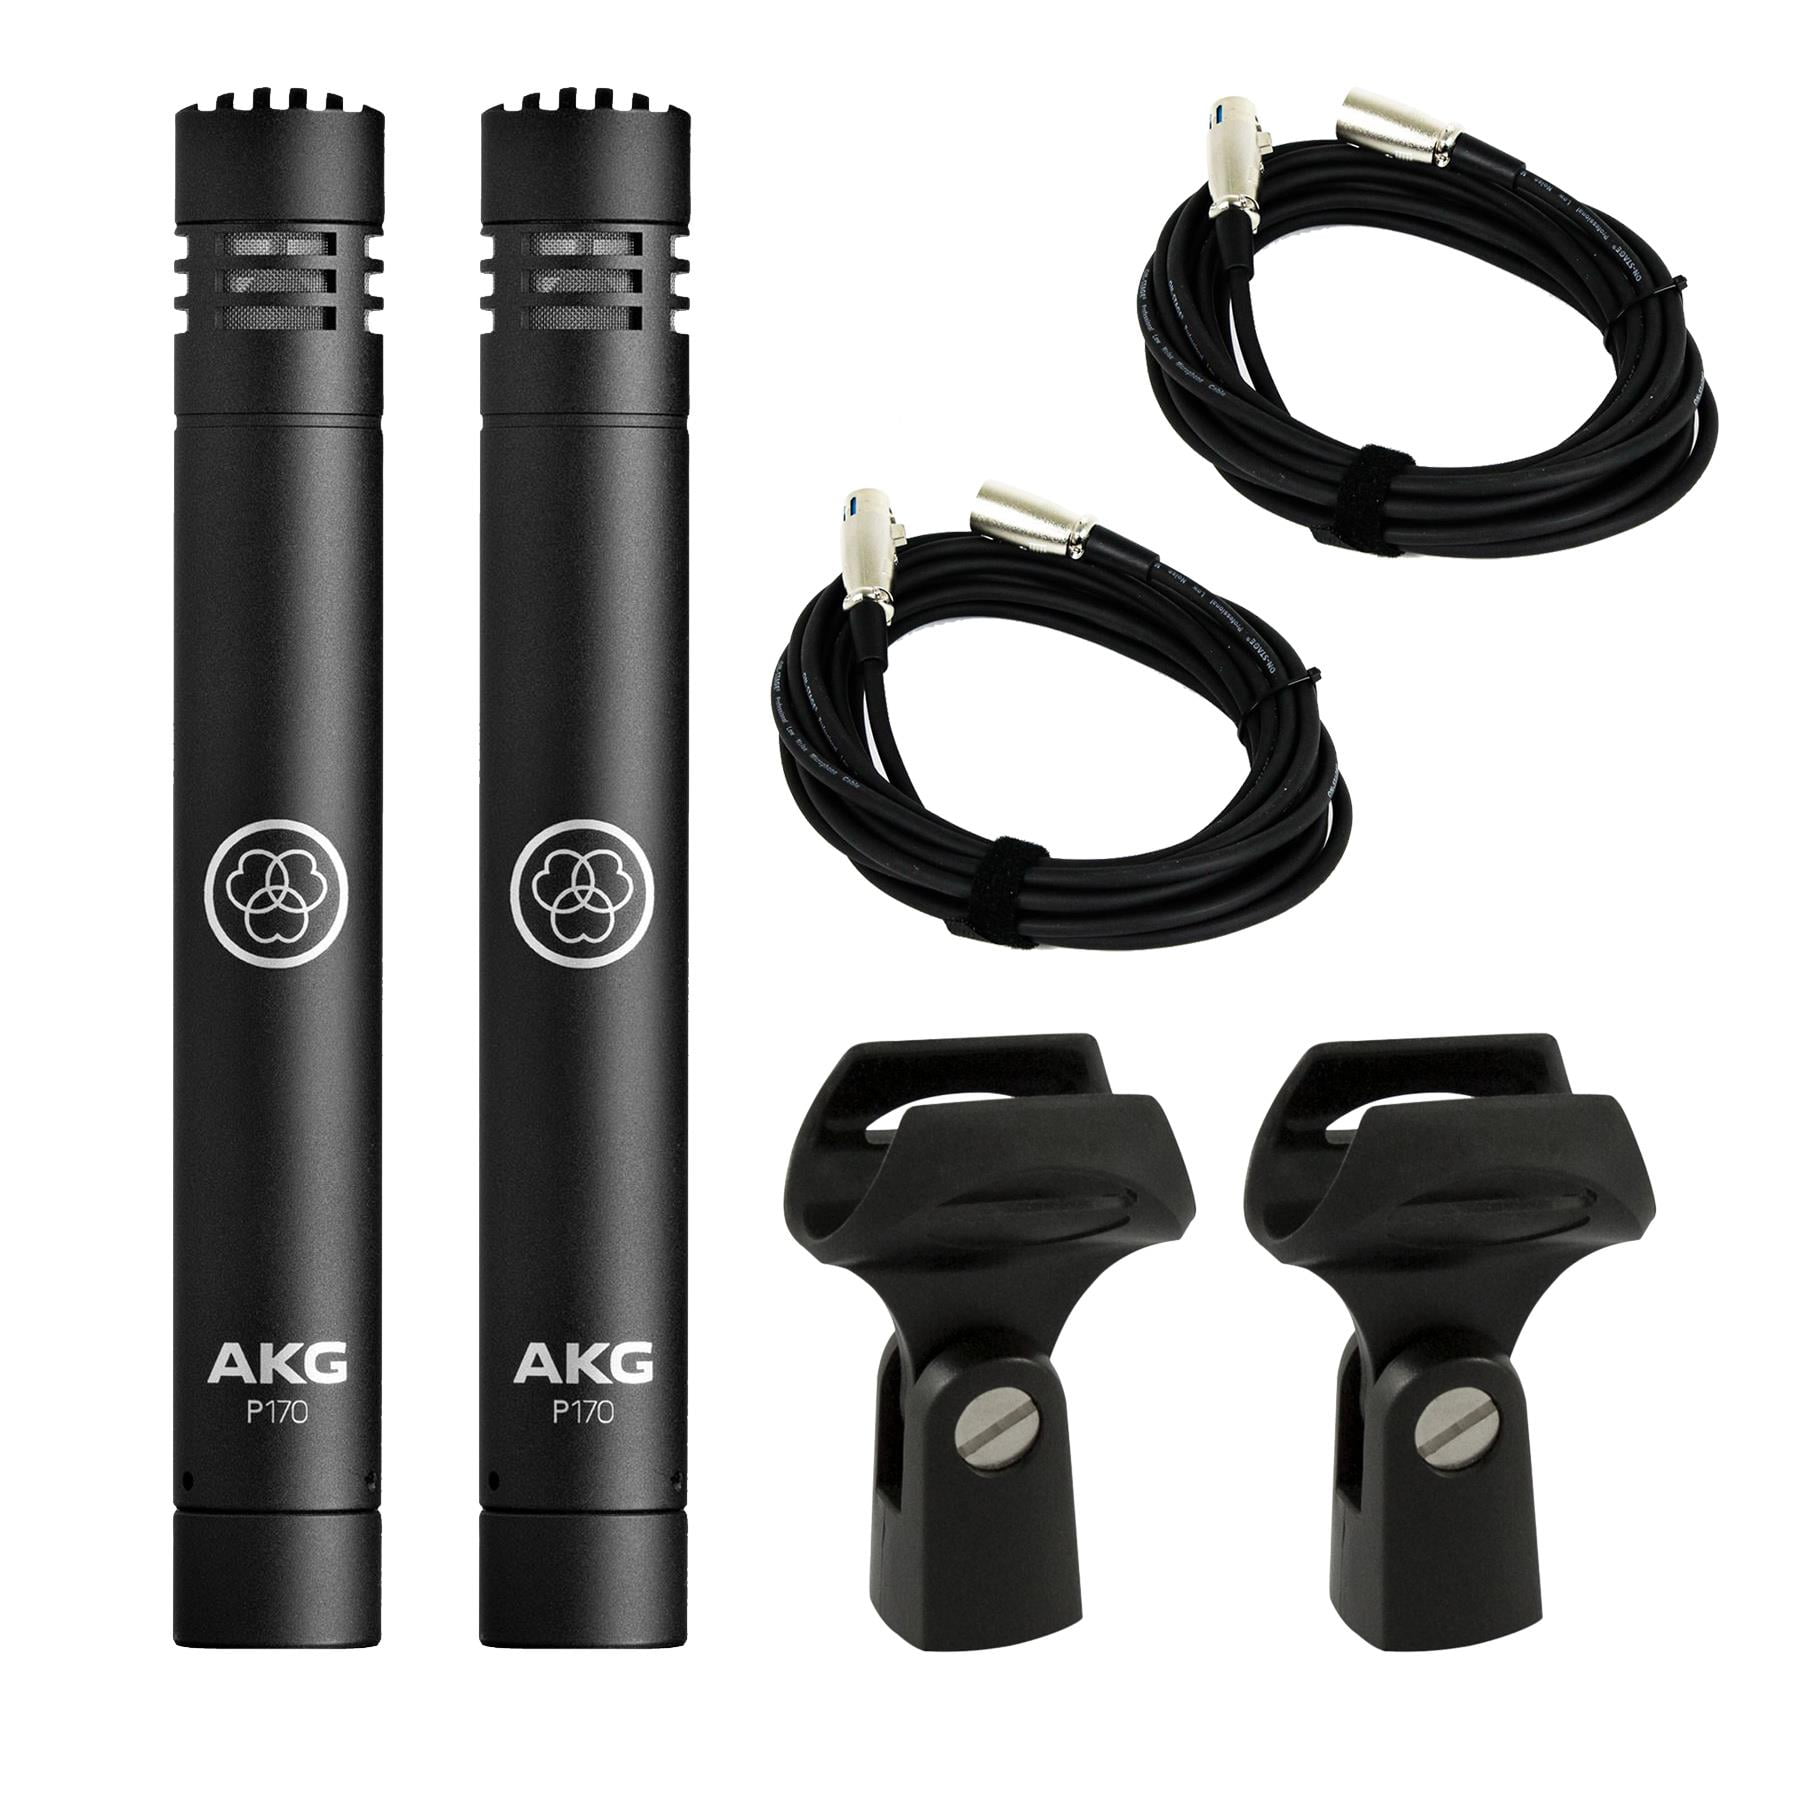 AKG P170 High-Performance Instrumental Condenser Microphone & Stagg 6m XLR to XLR Plug Microphone Cable